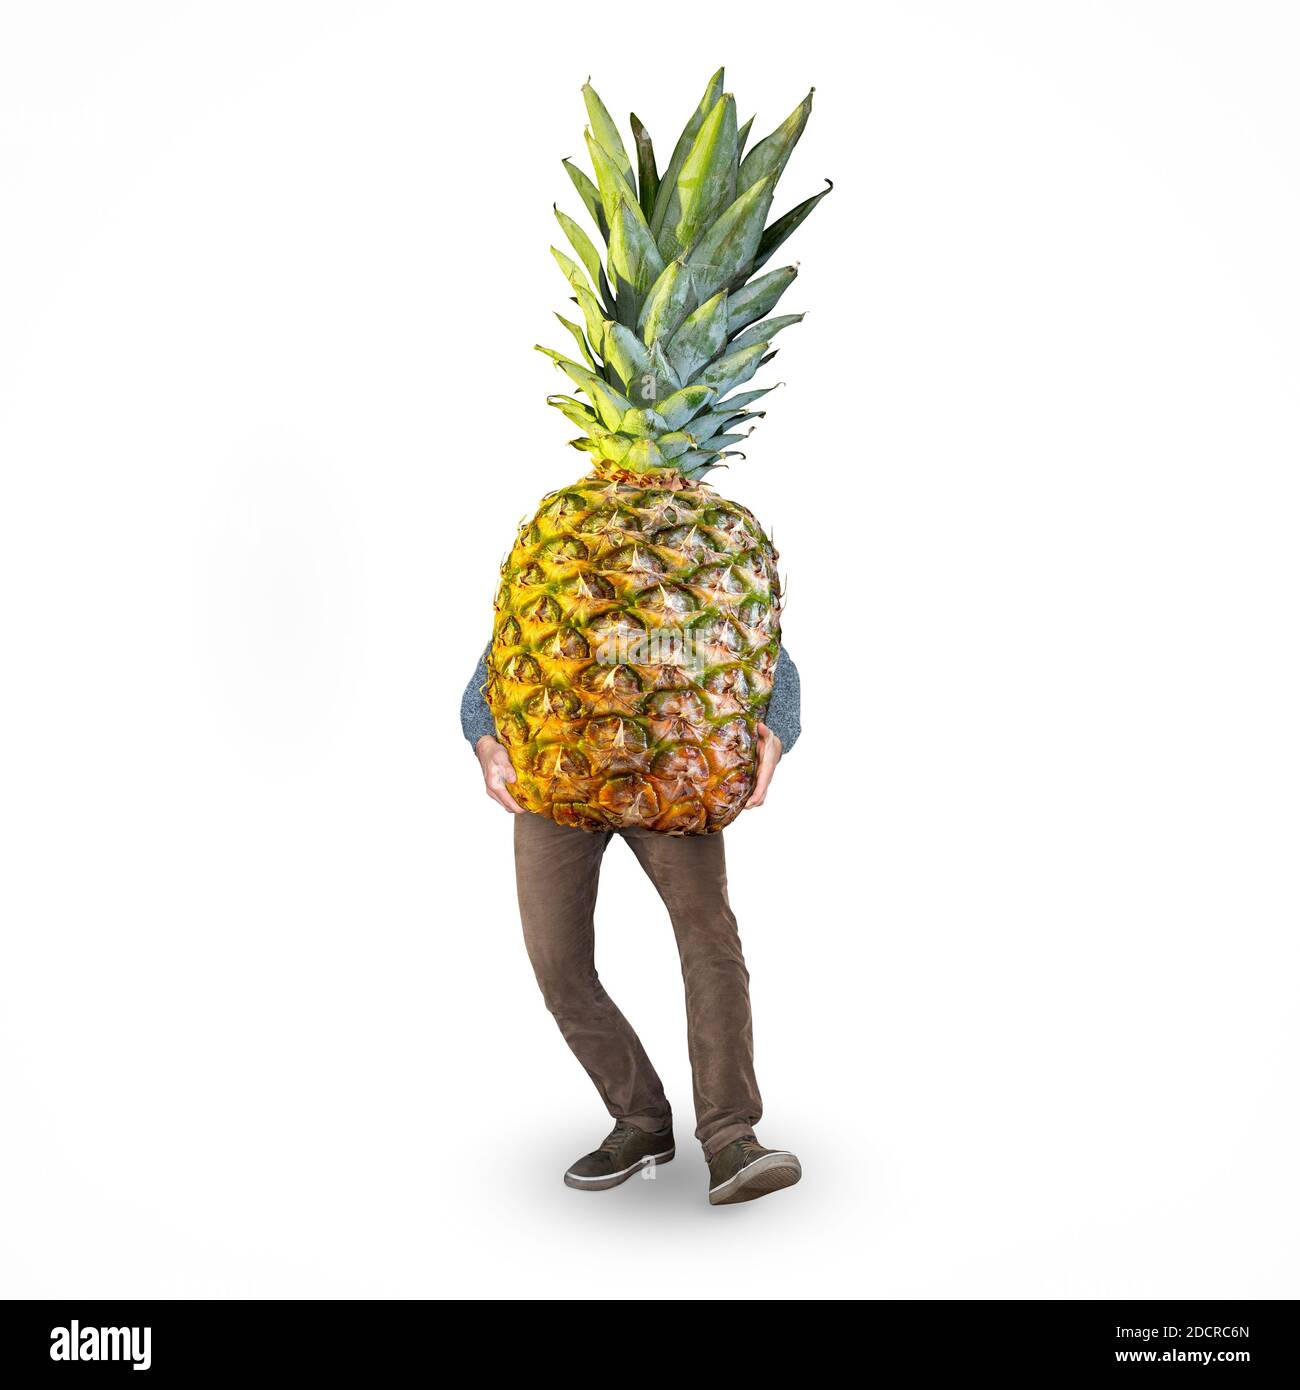 Pineapple on legs isolated on white background Stock Photo